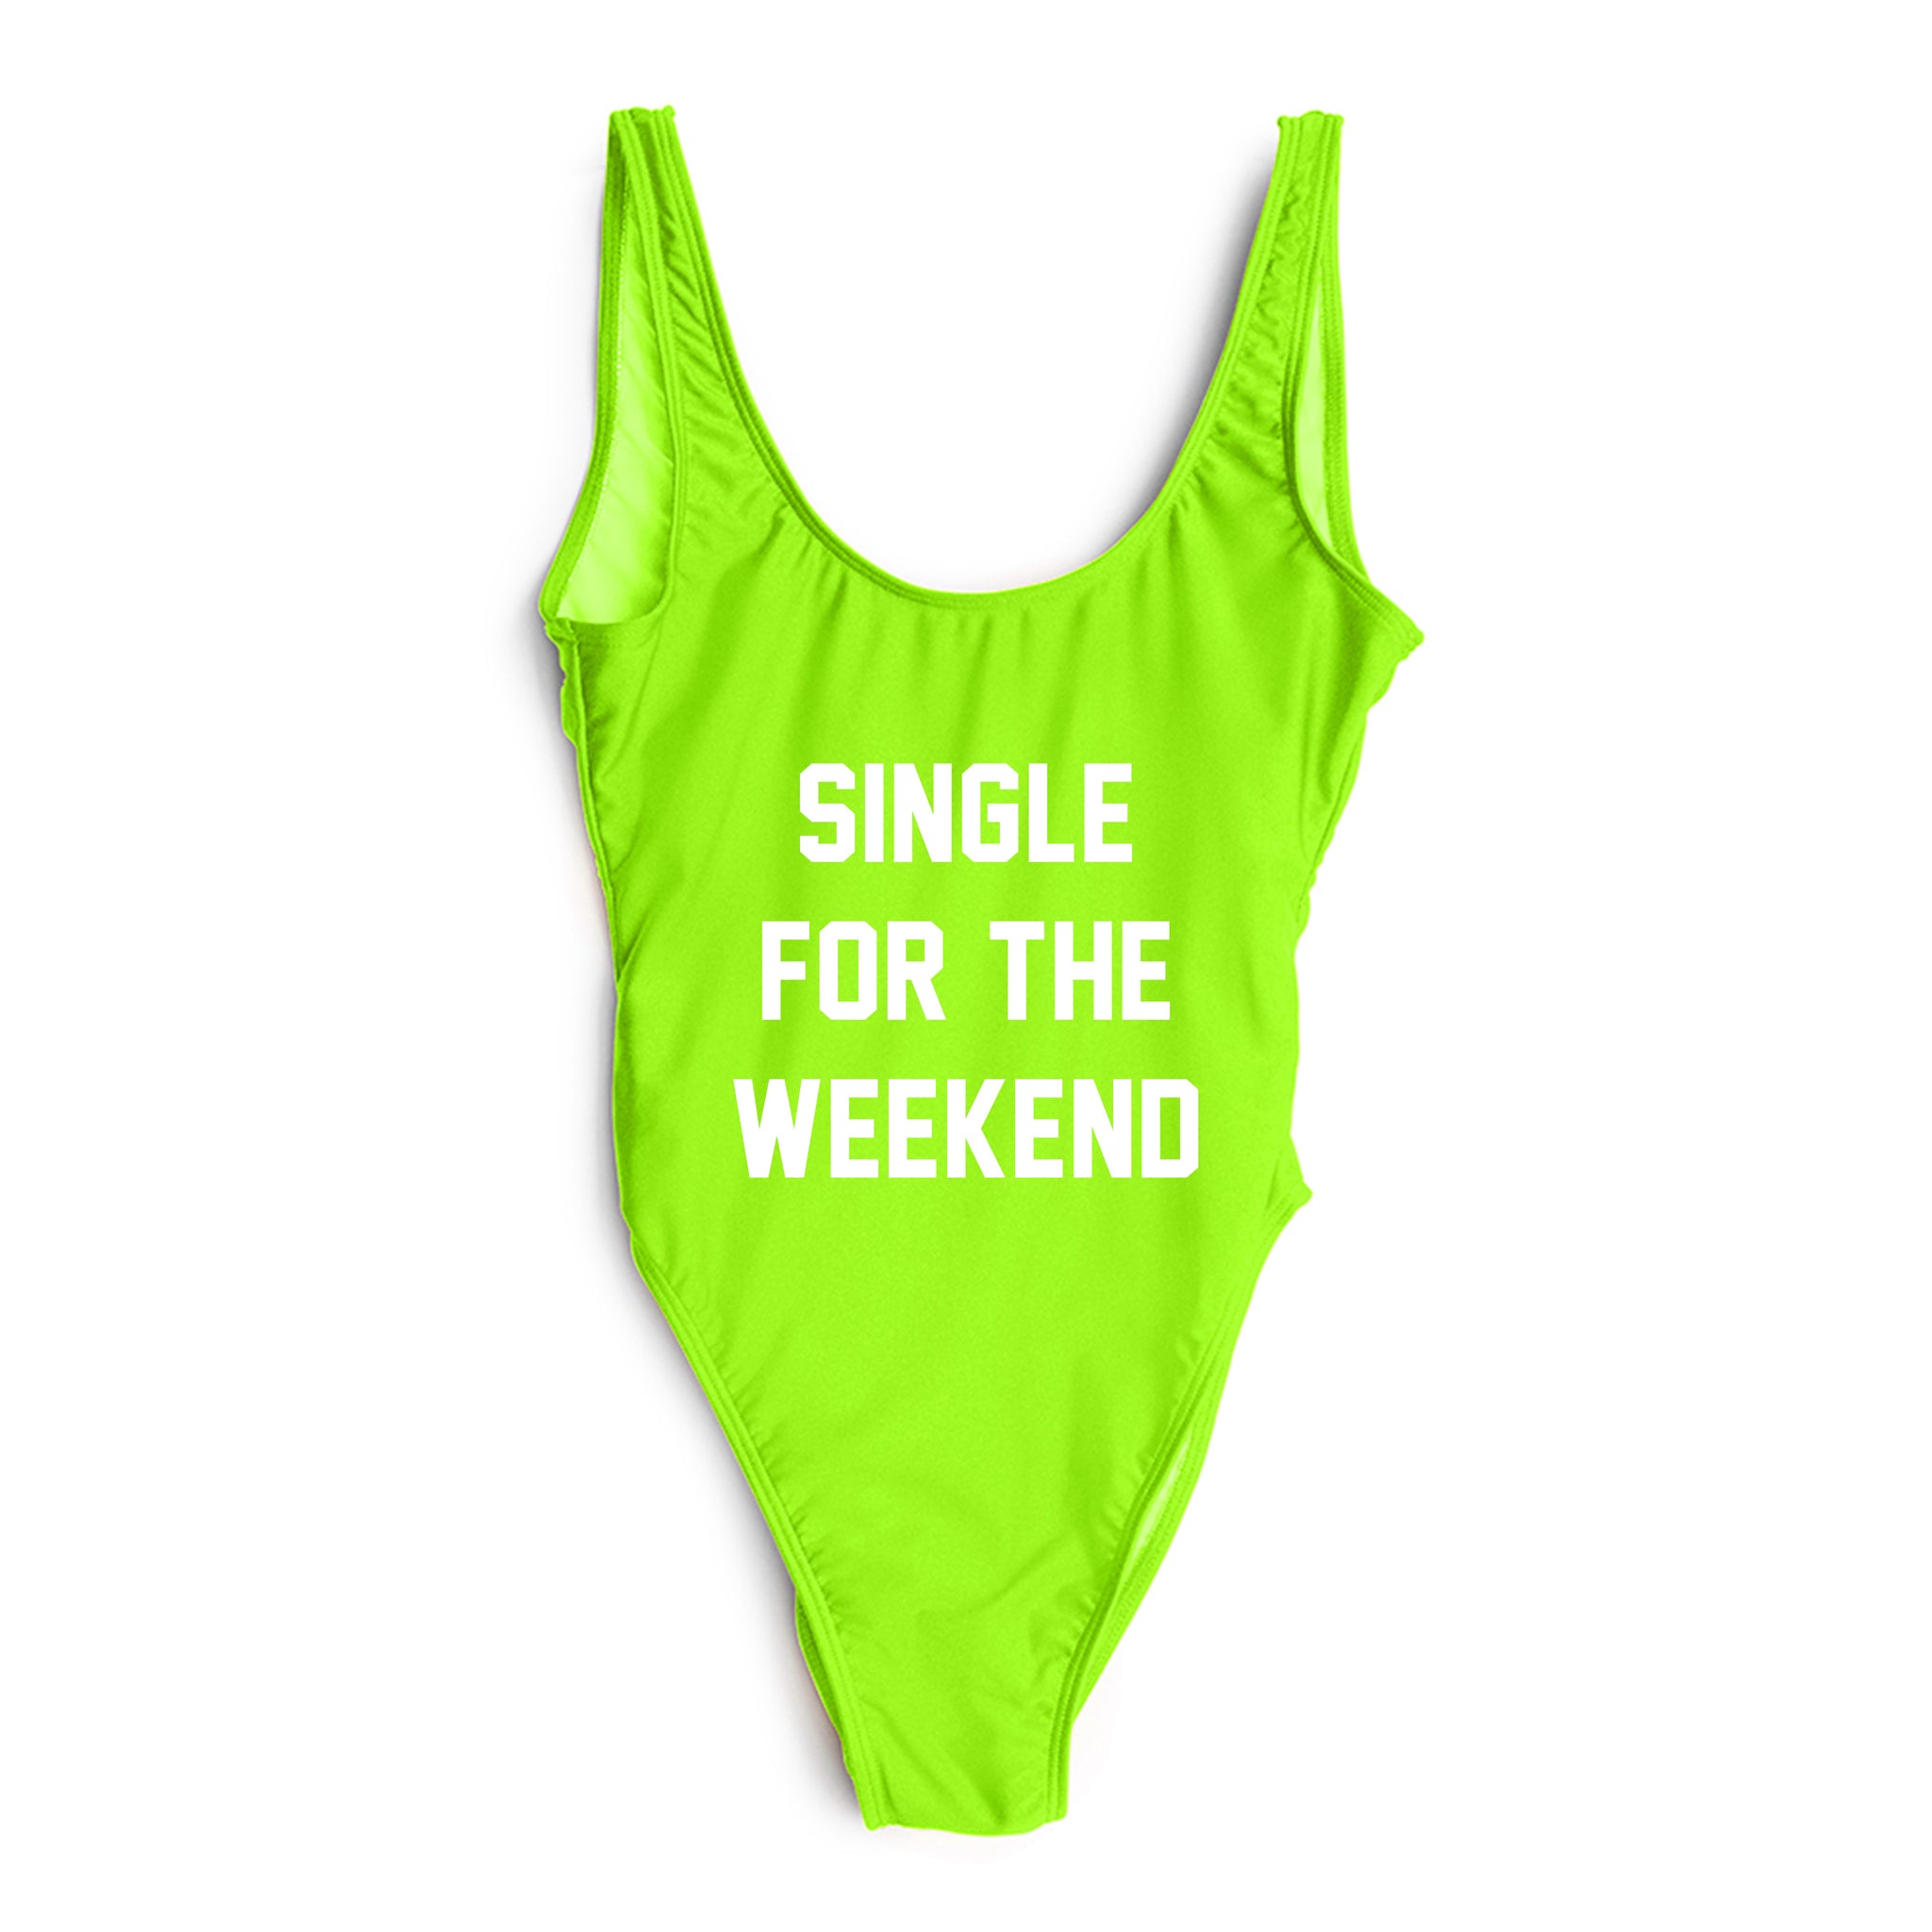 SINGLE FOR THE WEEKEND [SWIMSUIT]